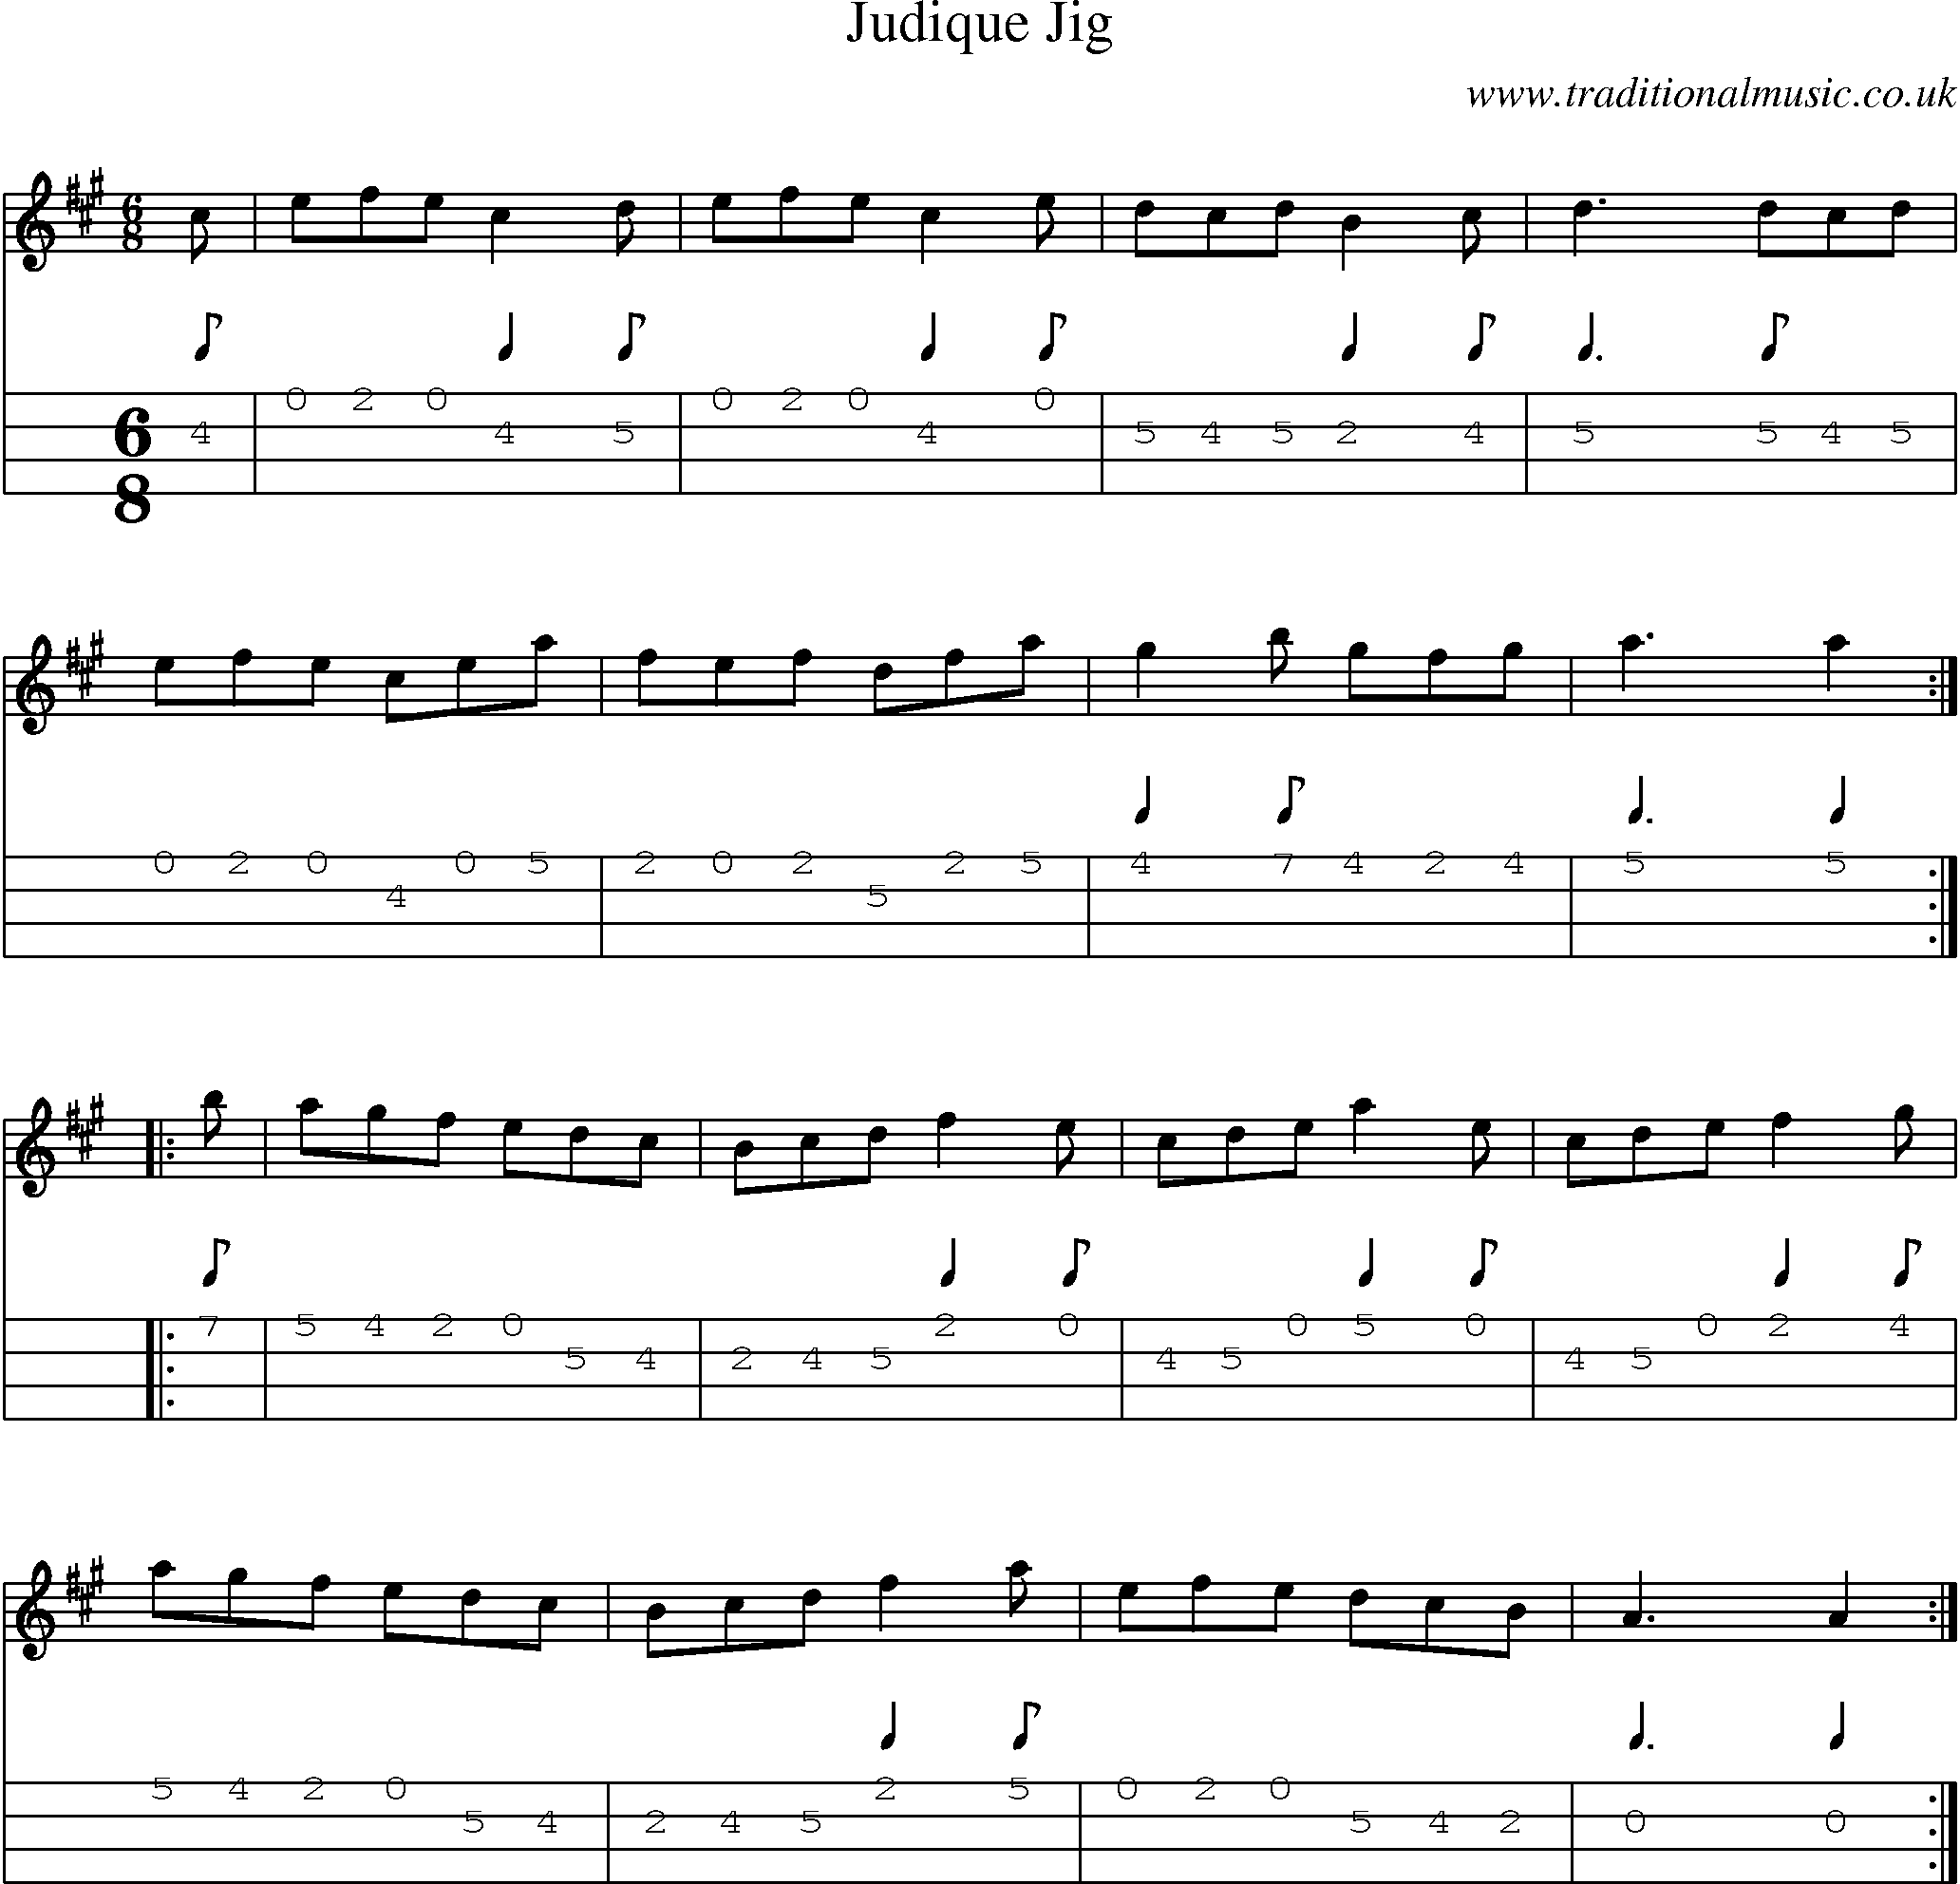 Music Score and Mandolin Tabs for Judique Jig